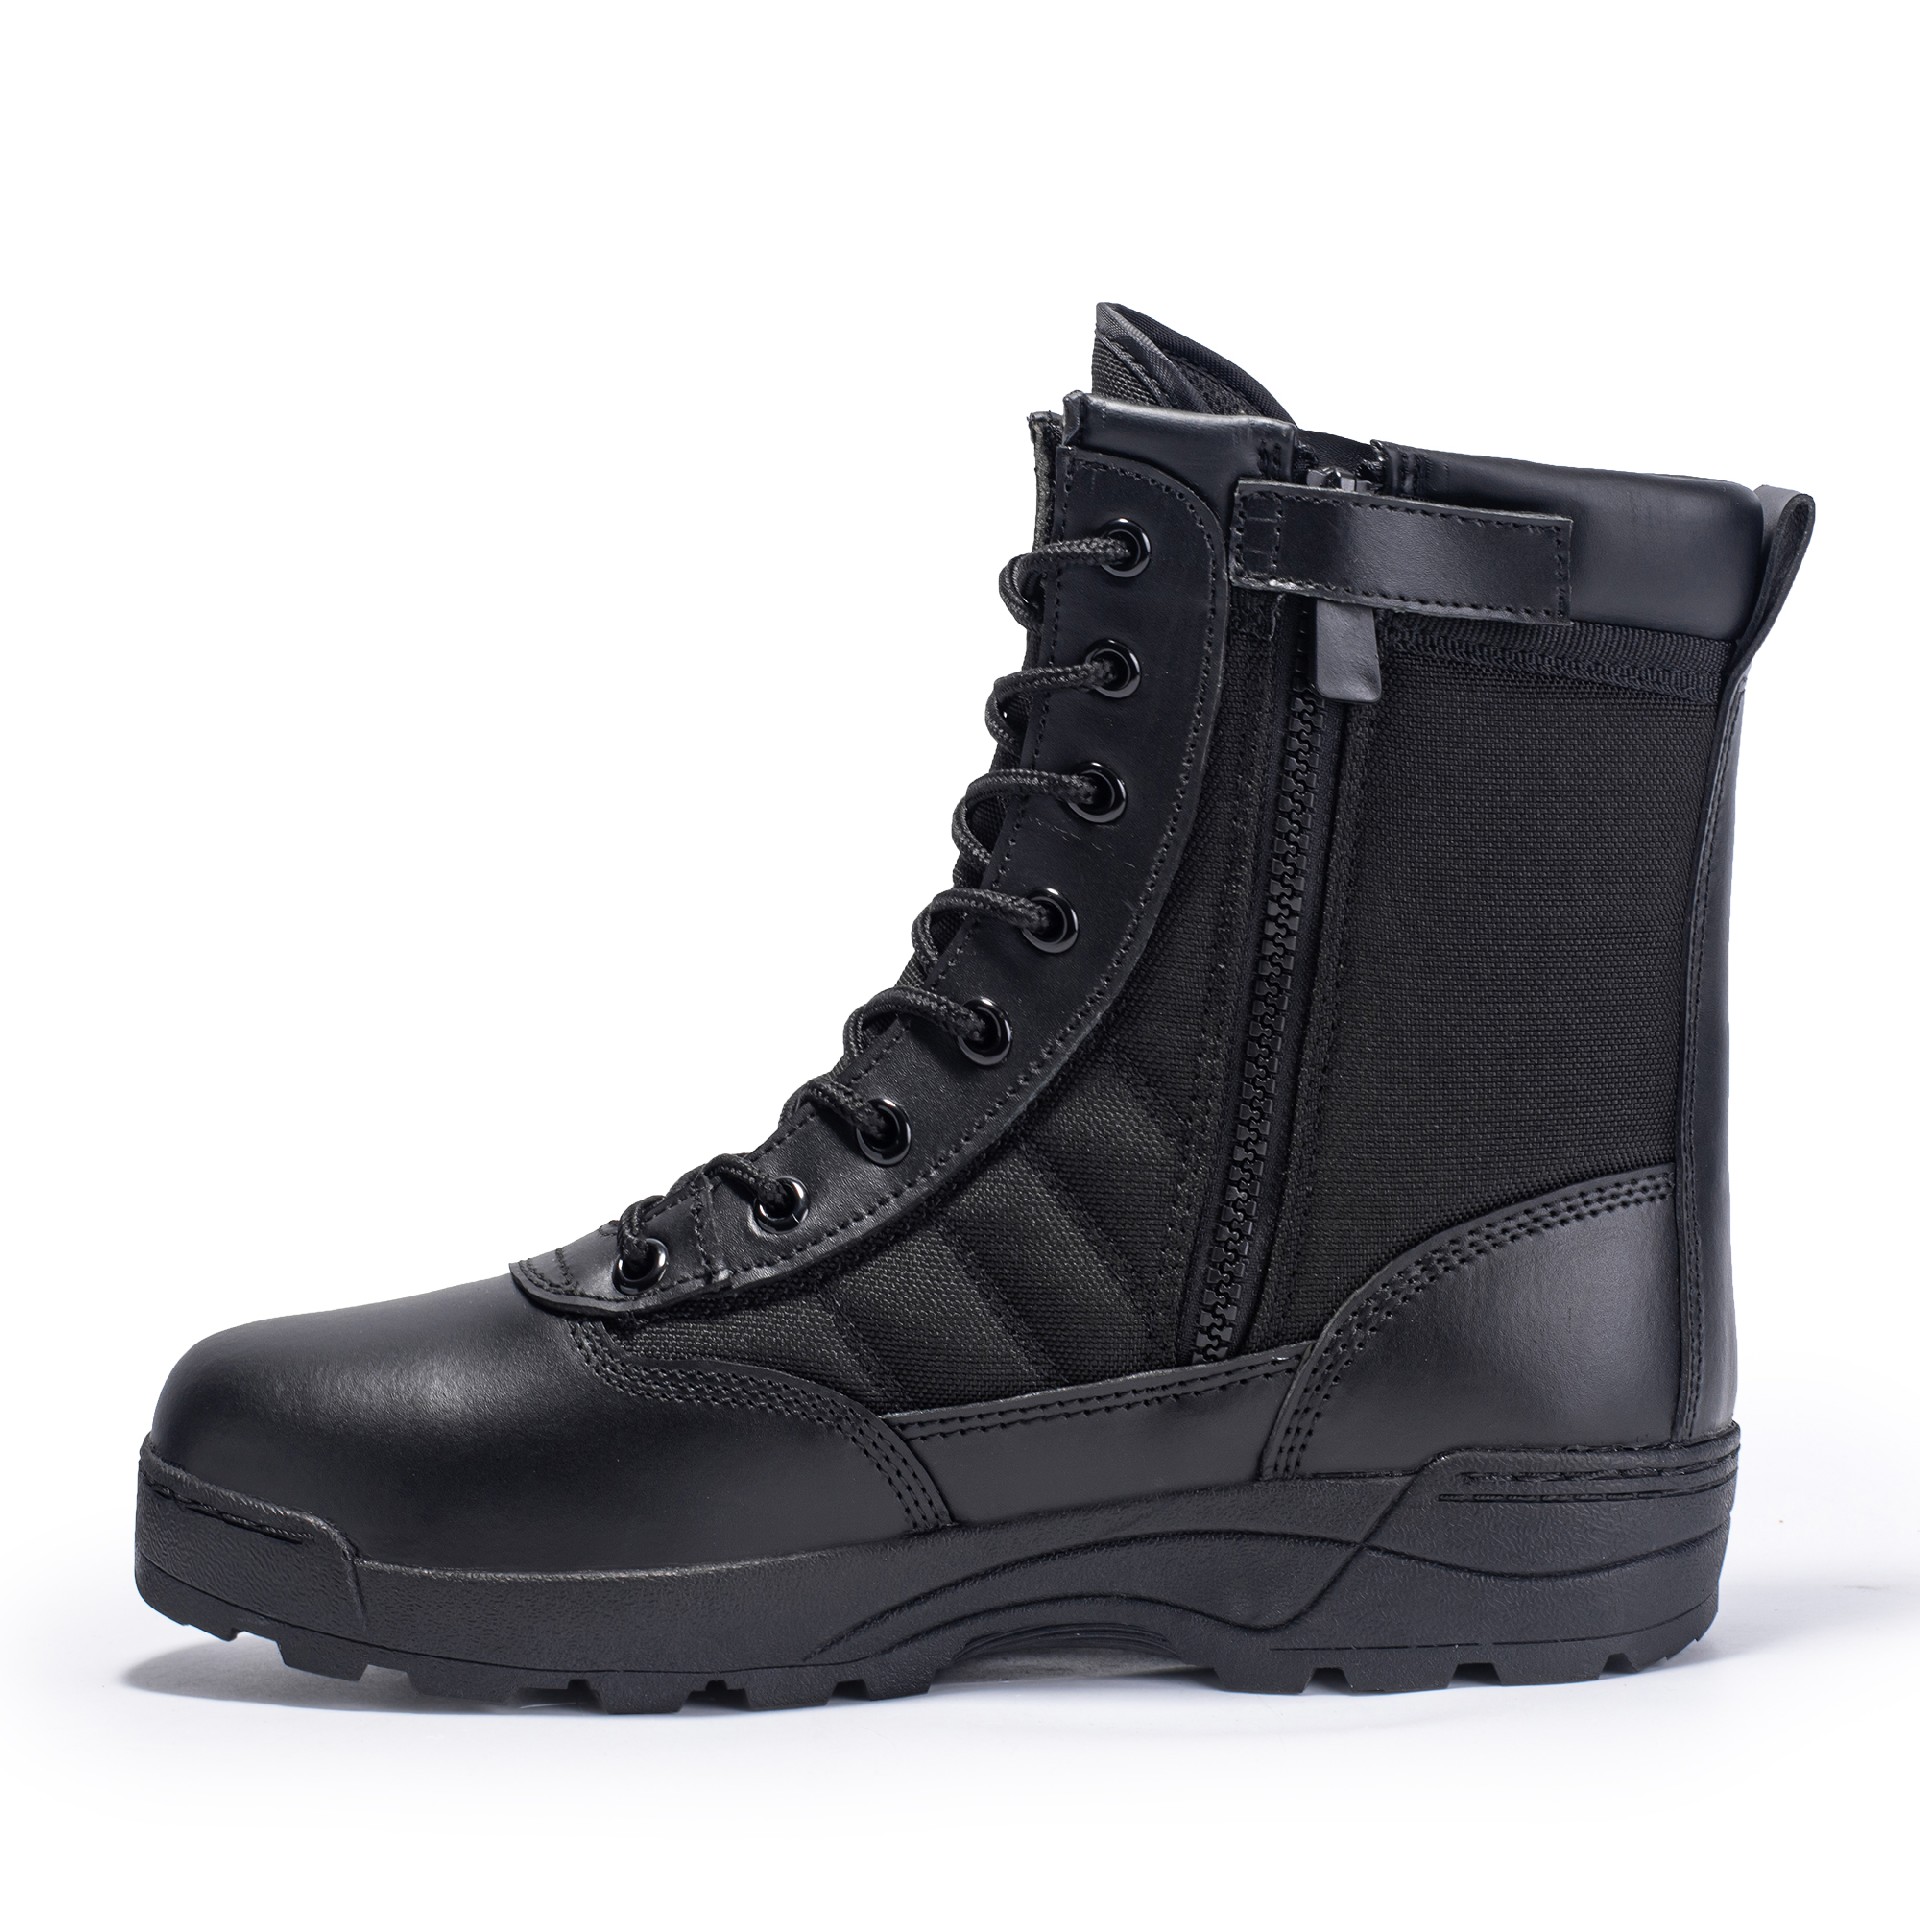 1176 Police tactical boot